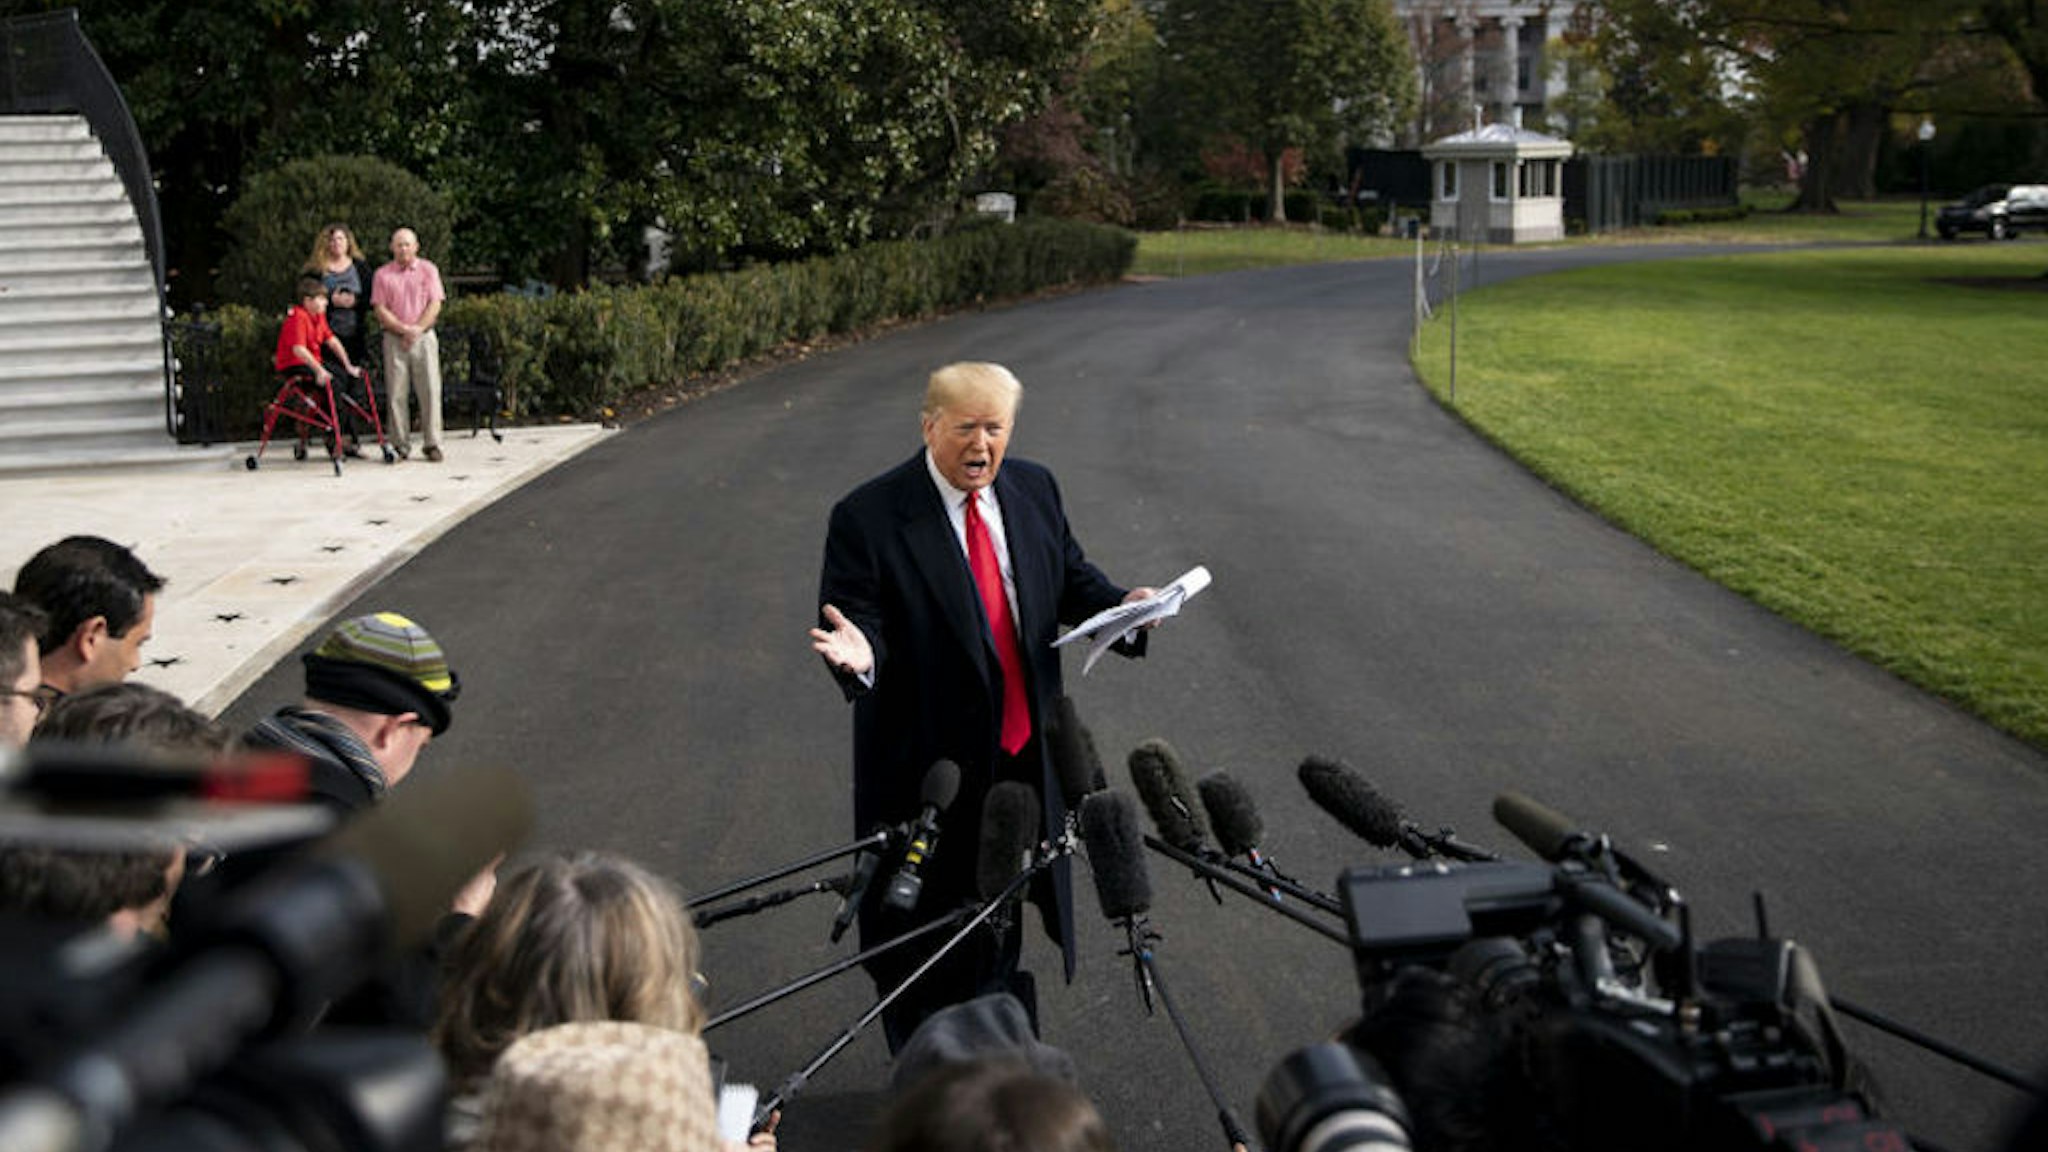 U.S. President Donald Trump speaks to members of the media before boarding Marine One on the South Lawn of the White House in Washington, D.C., U.S., on Wednesday, Nov. 20, 2019. The House Intelligence Committee is hearing from Gordon Sondland, the U.S. ambassador to the European Union, on the fourth day of public testimony in the impeachment inquiry into President Trump. Photographer: Al